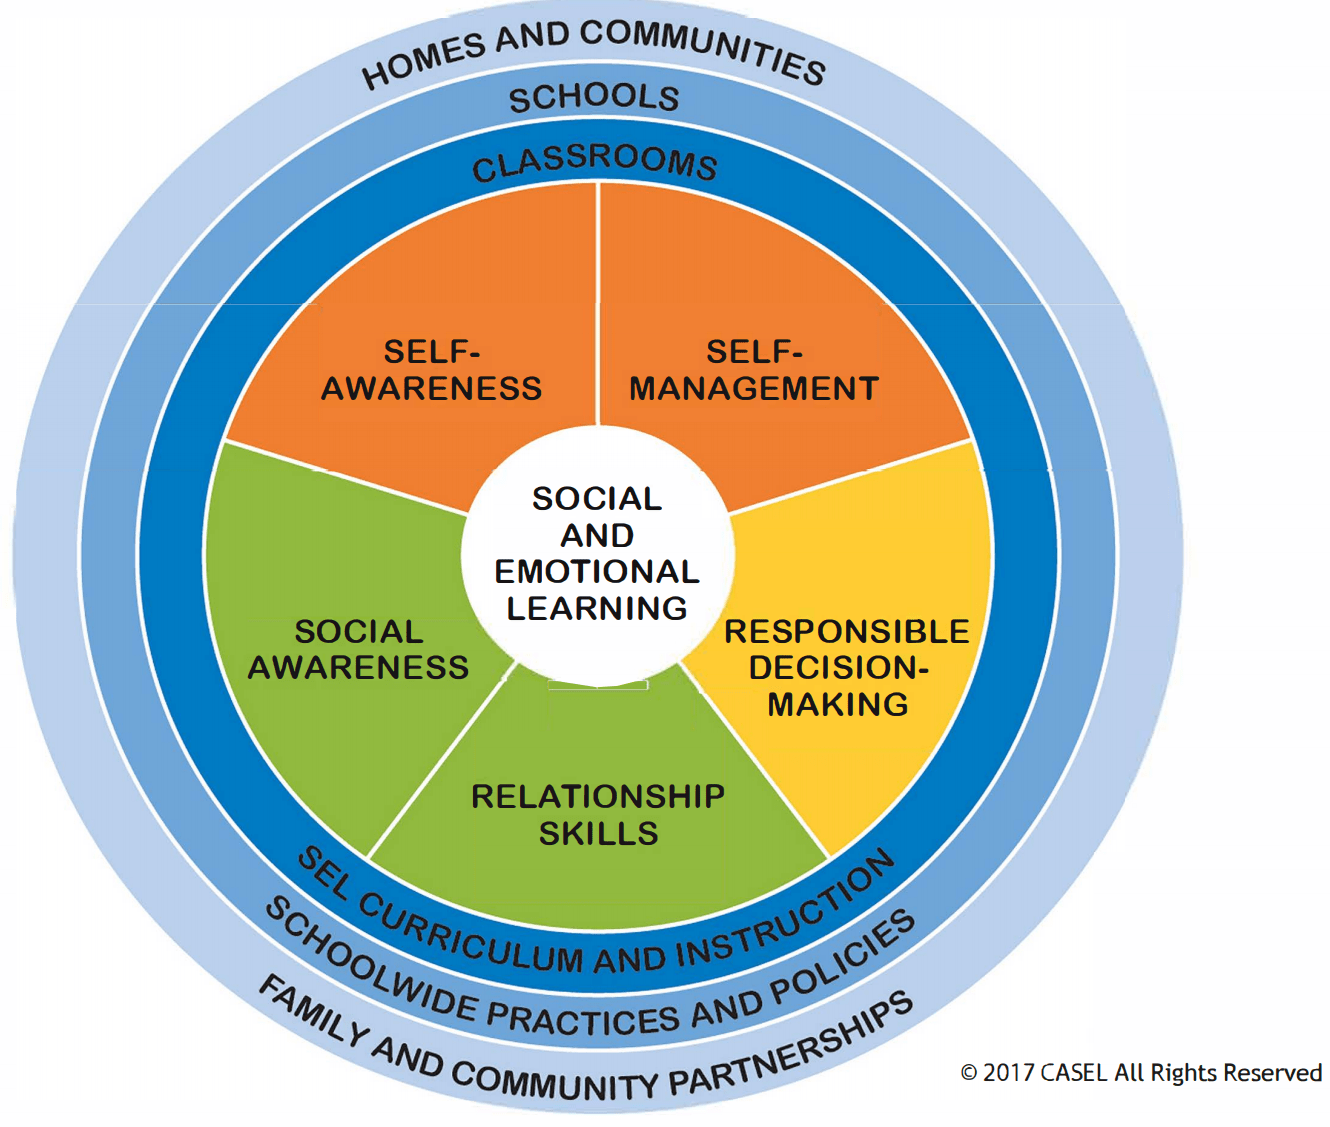 7. Future of Social-Emotional Learning